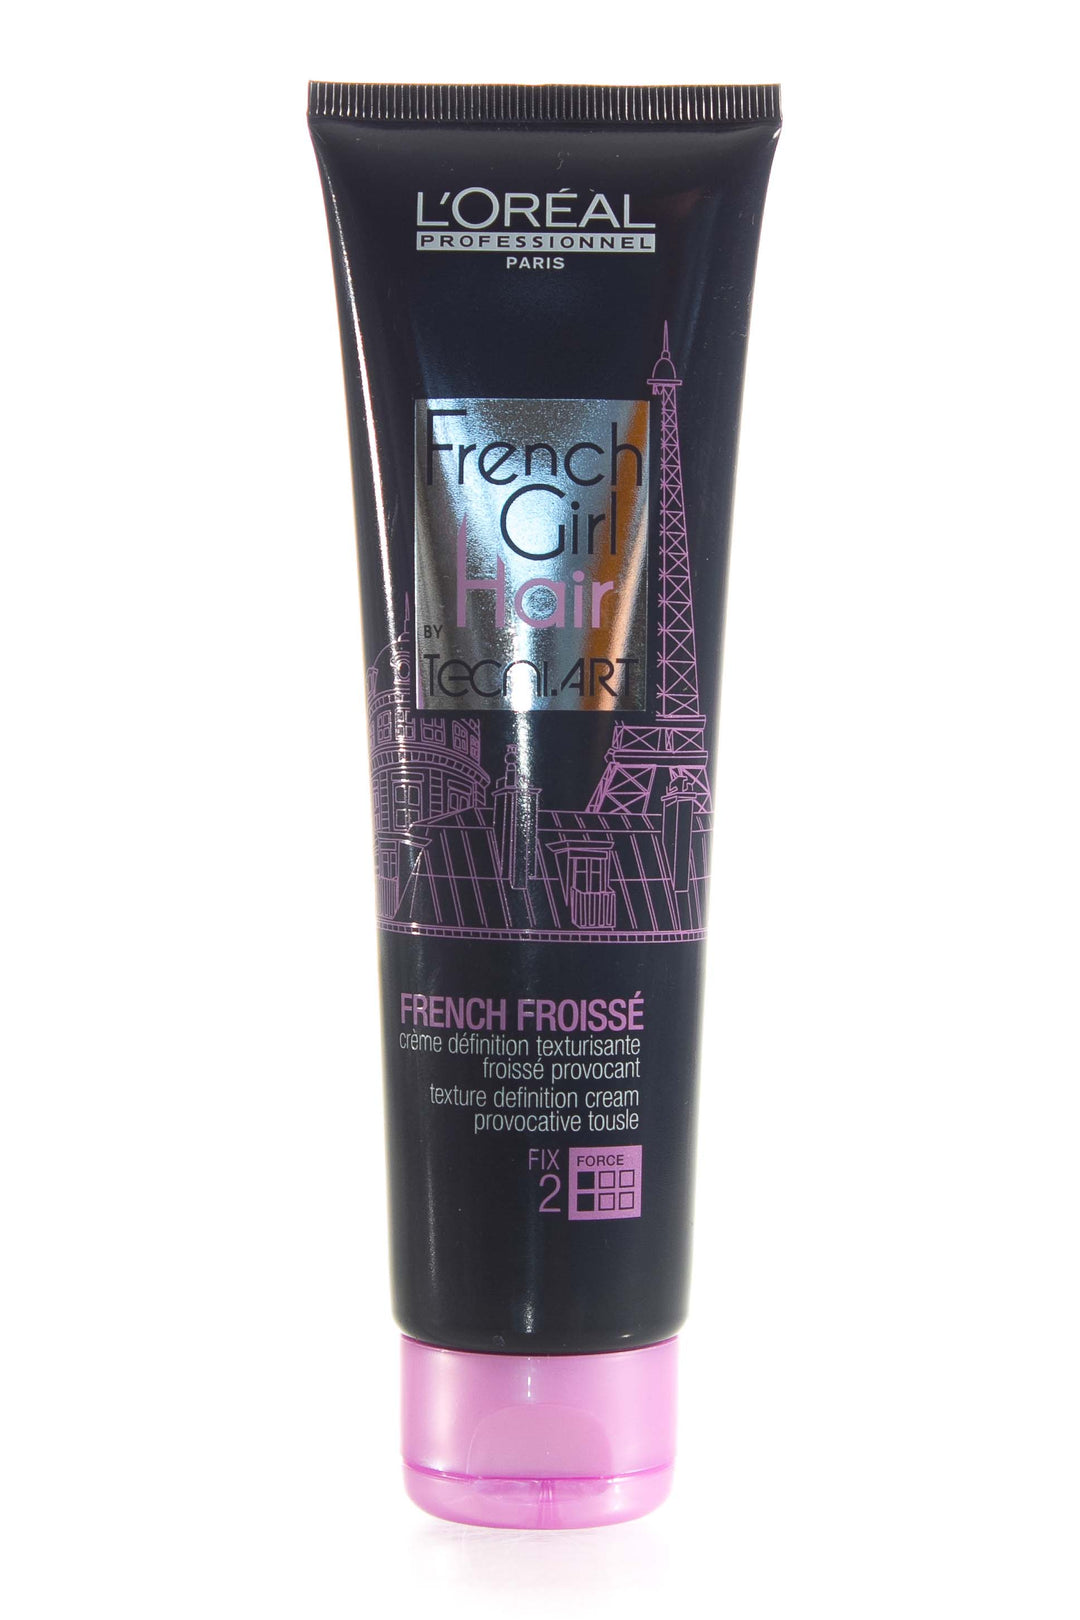 l'oreal-french-girl-hair-french-froisse-150ml